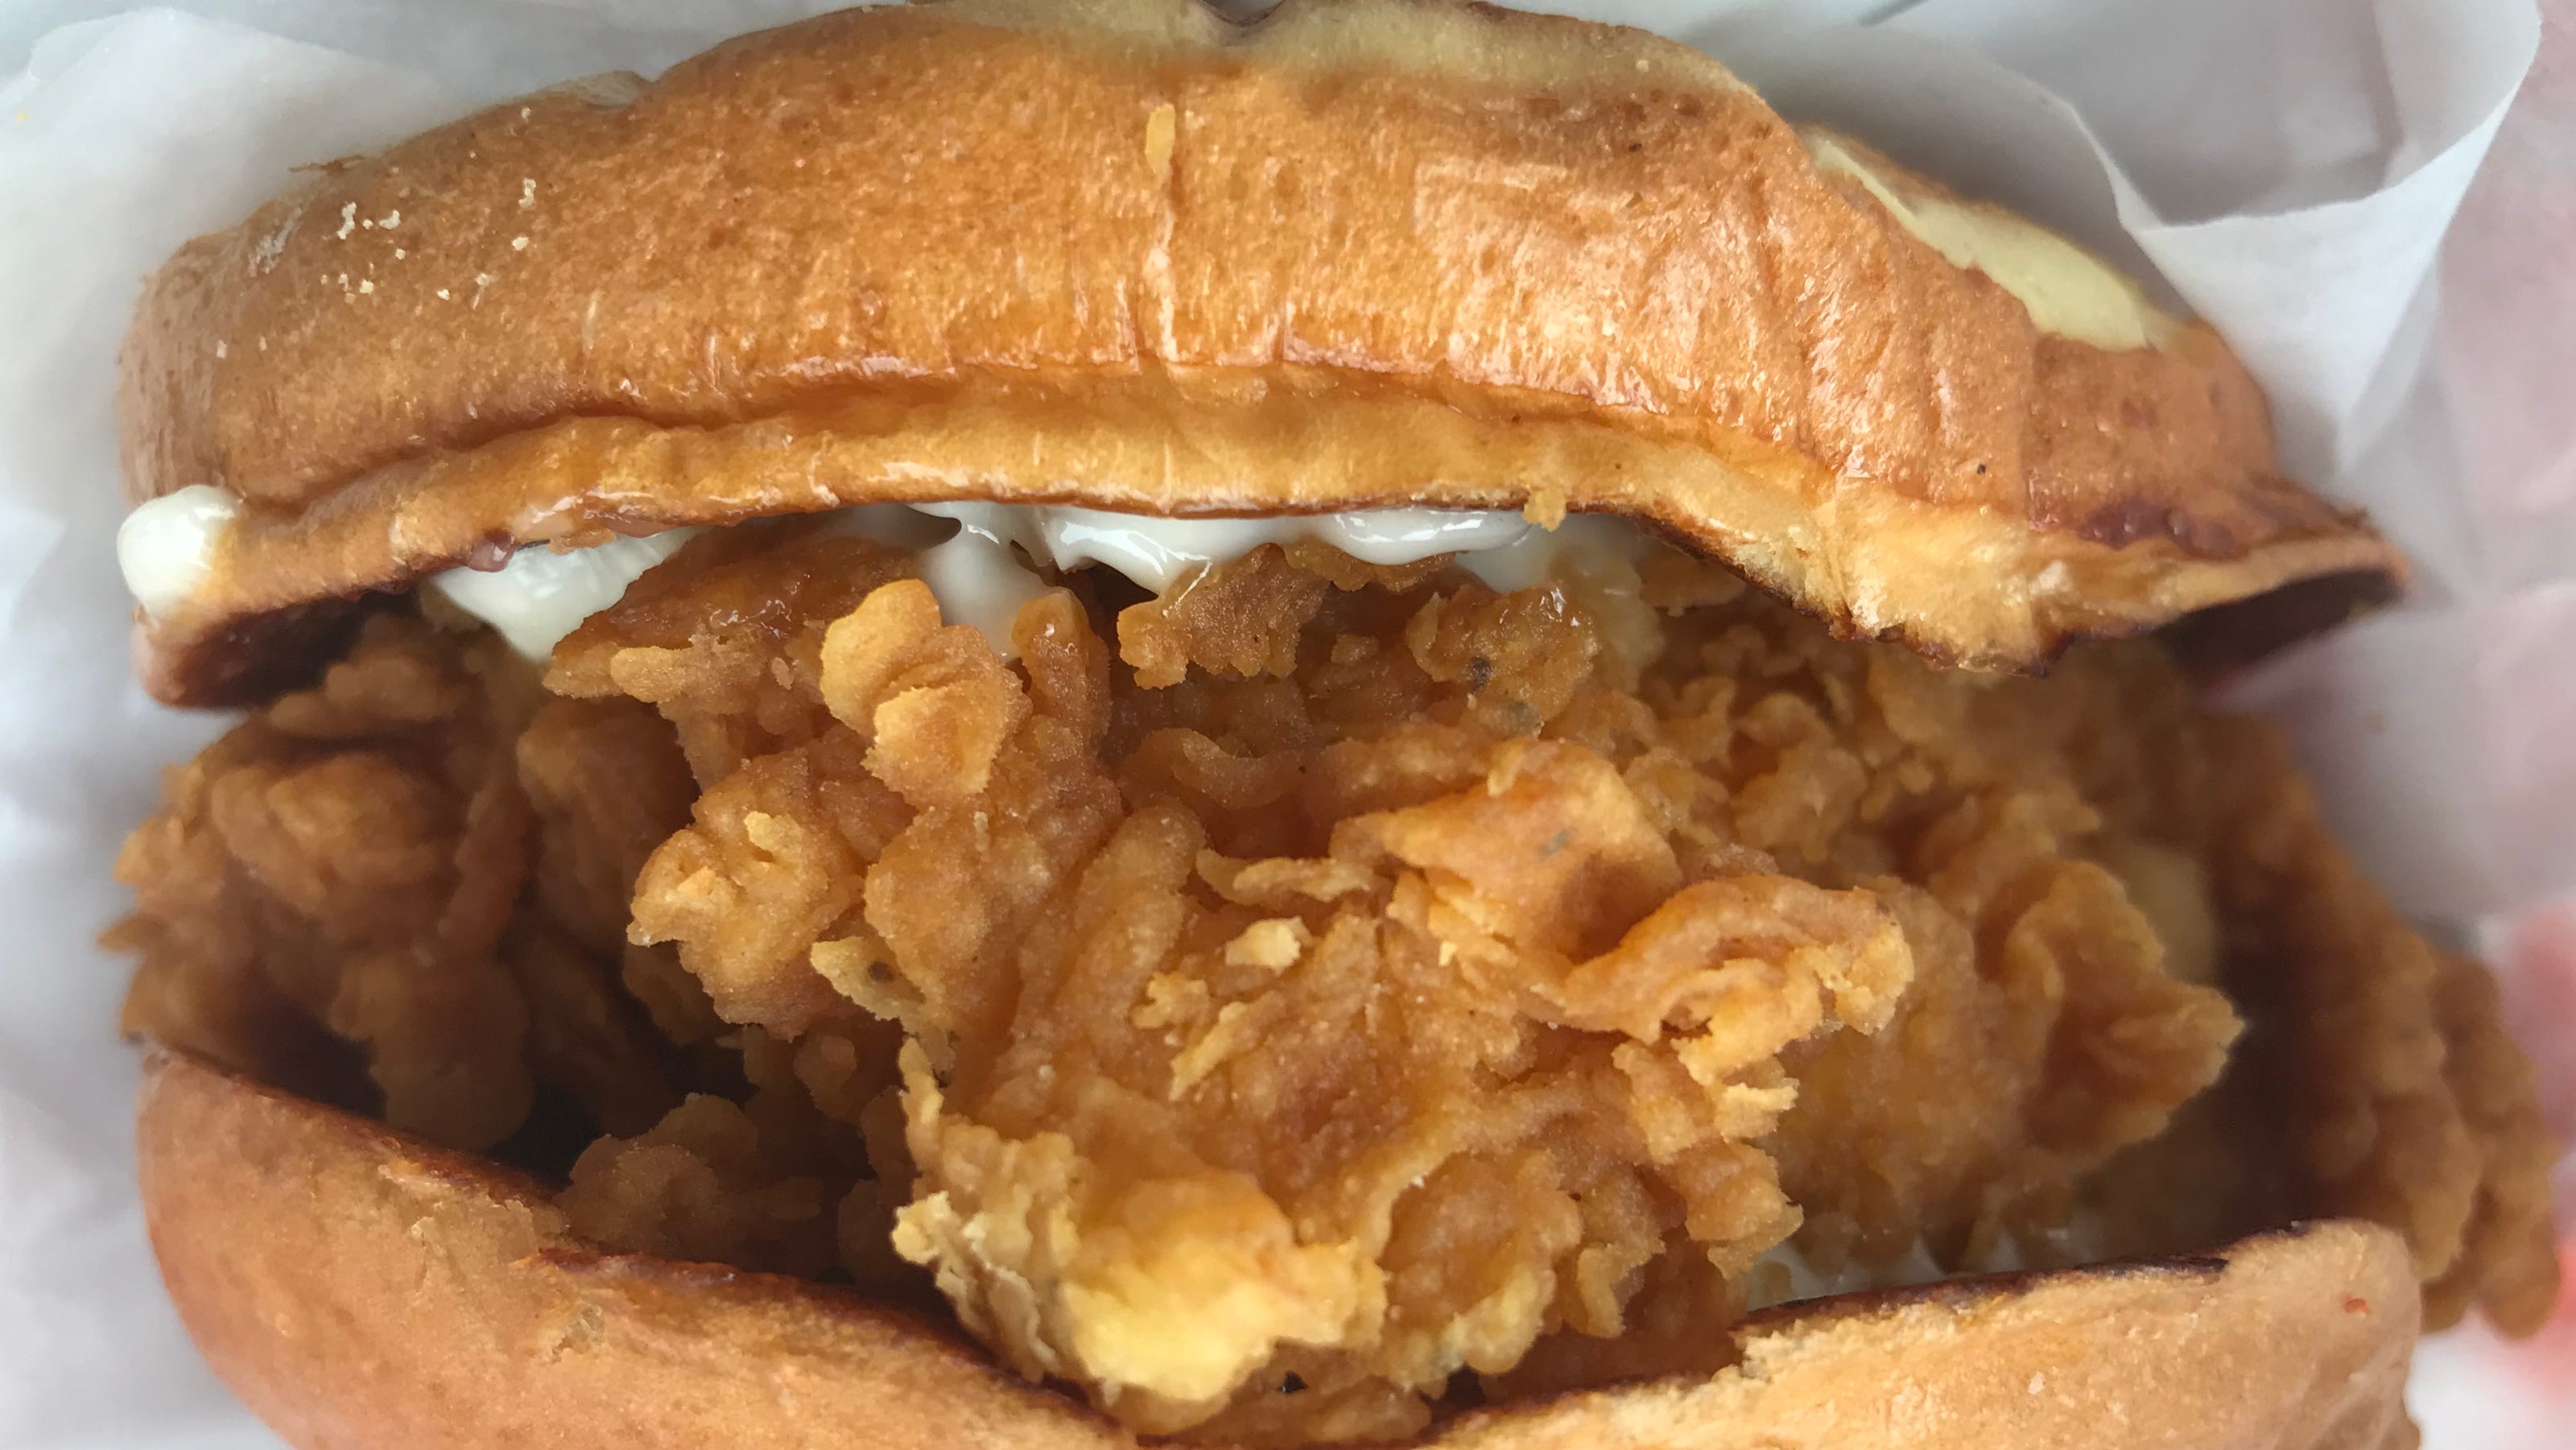 popeyes-chicken-sandwich-price-and-how-to-get-it-in-milwaukee